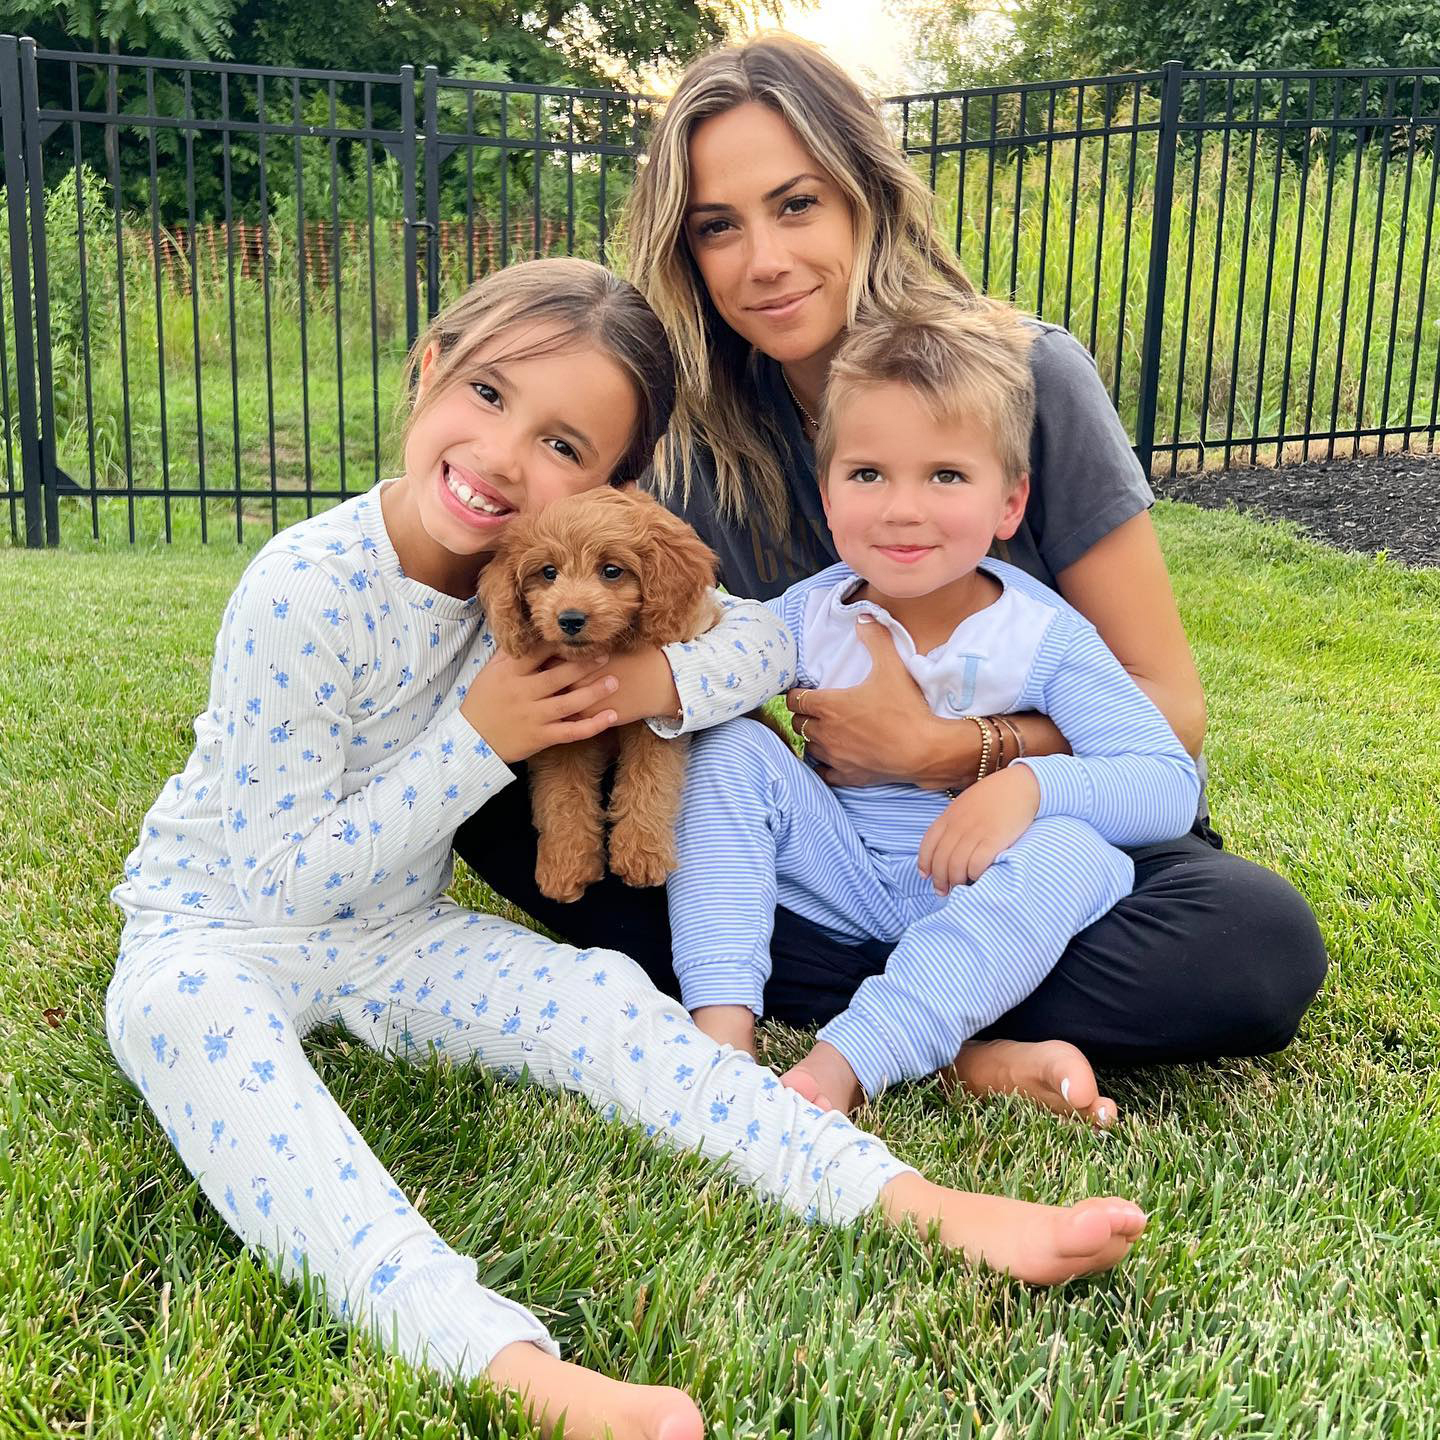 Jana Kramer Celebrity Moms and Dads Show Off Cuddly Pictures of Their Kids and Pets